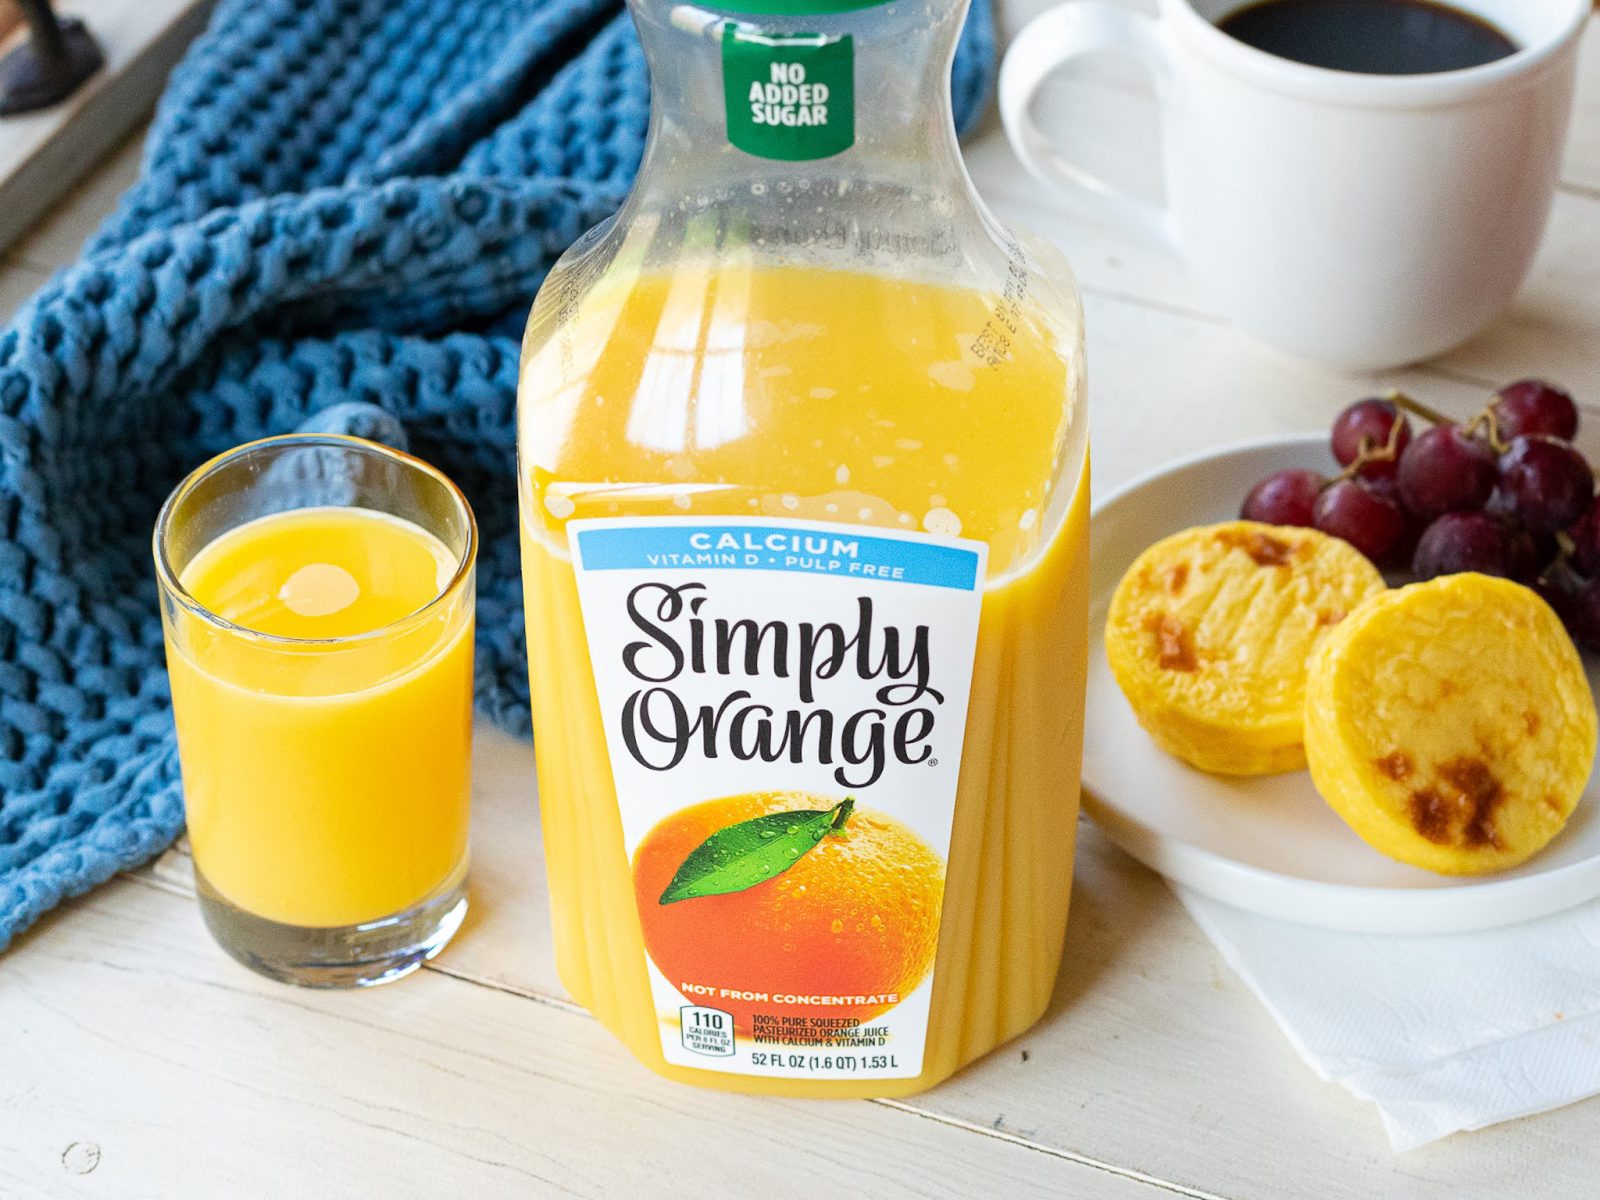 Simply Orange Juice As Low As $2 At Publix – Deal Ends Soon!